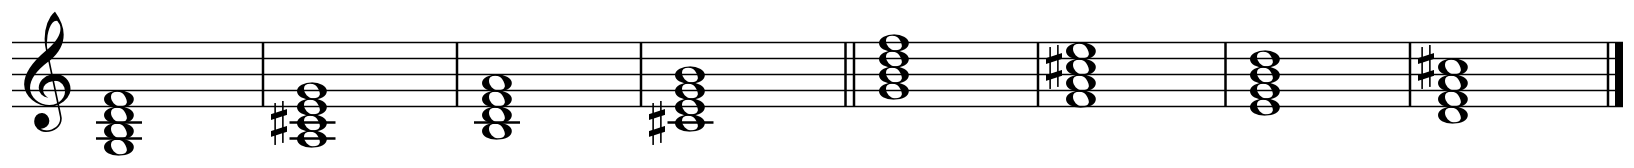 Parallel chord movement